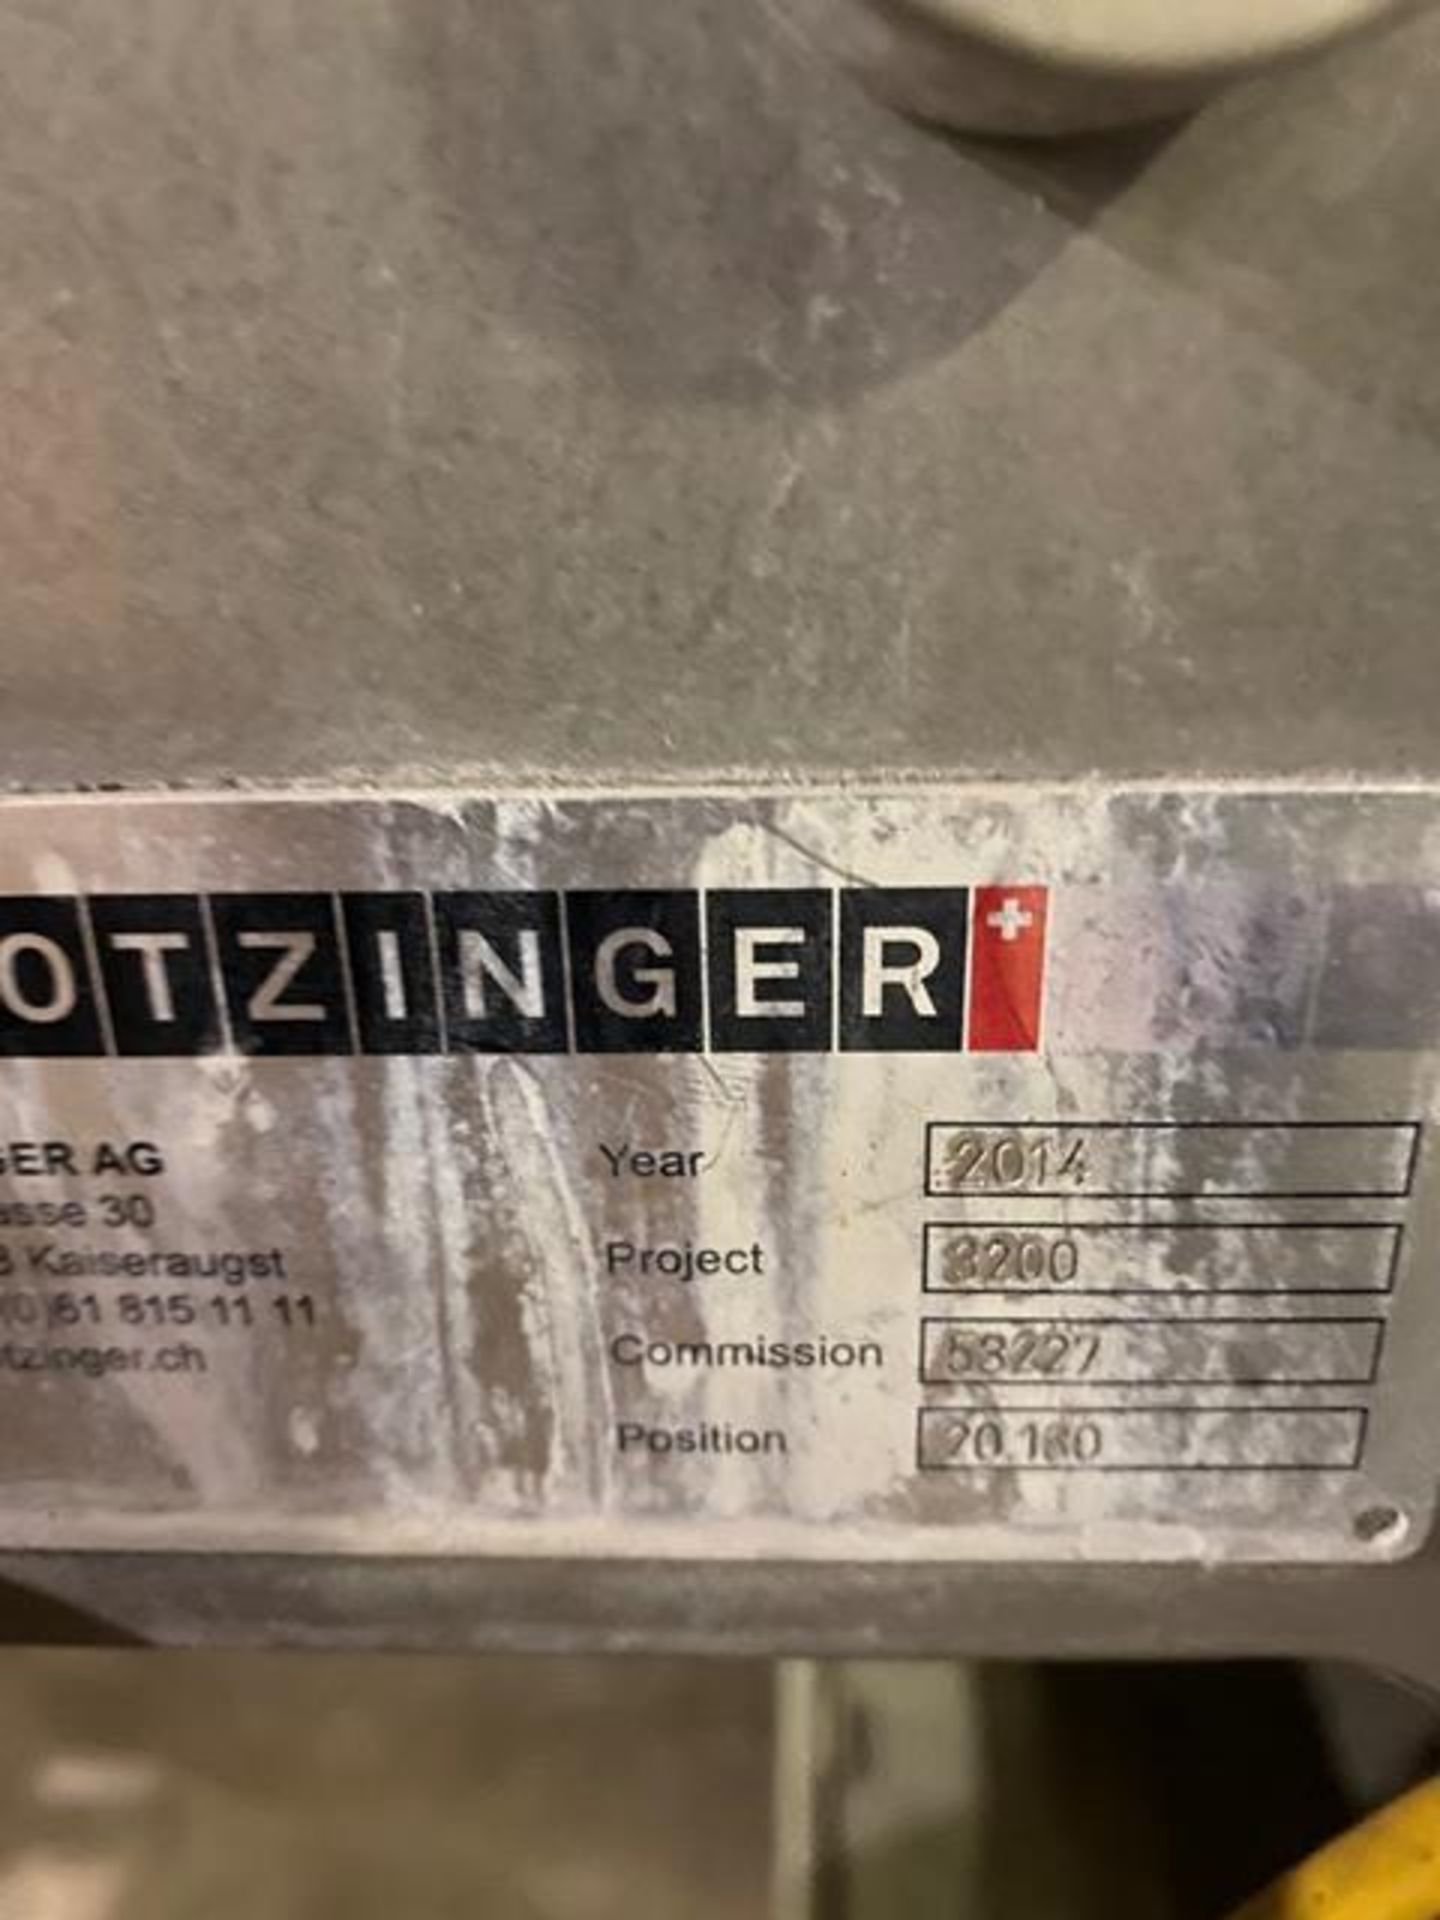 Rotzinger AG Vibrating Conveyor, DOM 2014, Located in Ottawa, OH - Image 2 of 5